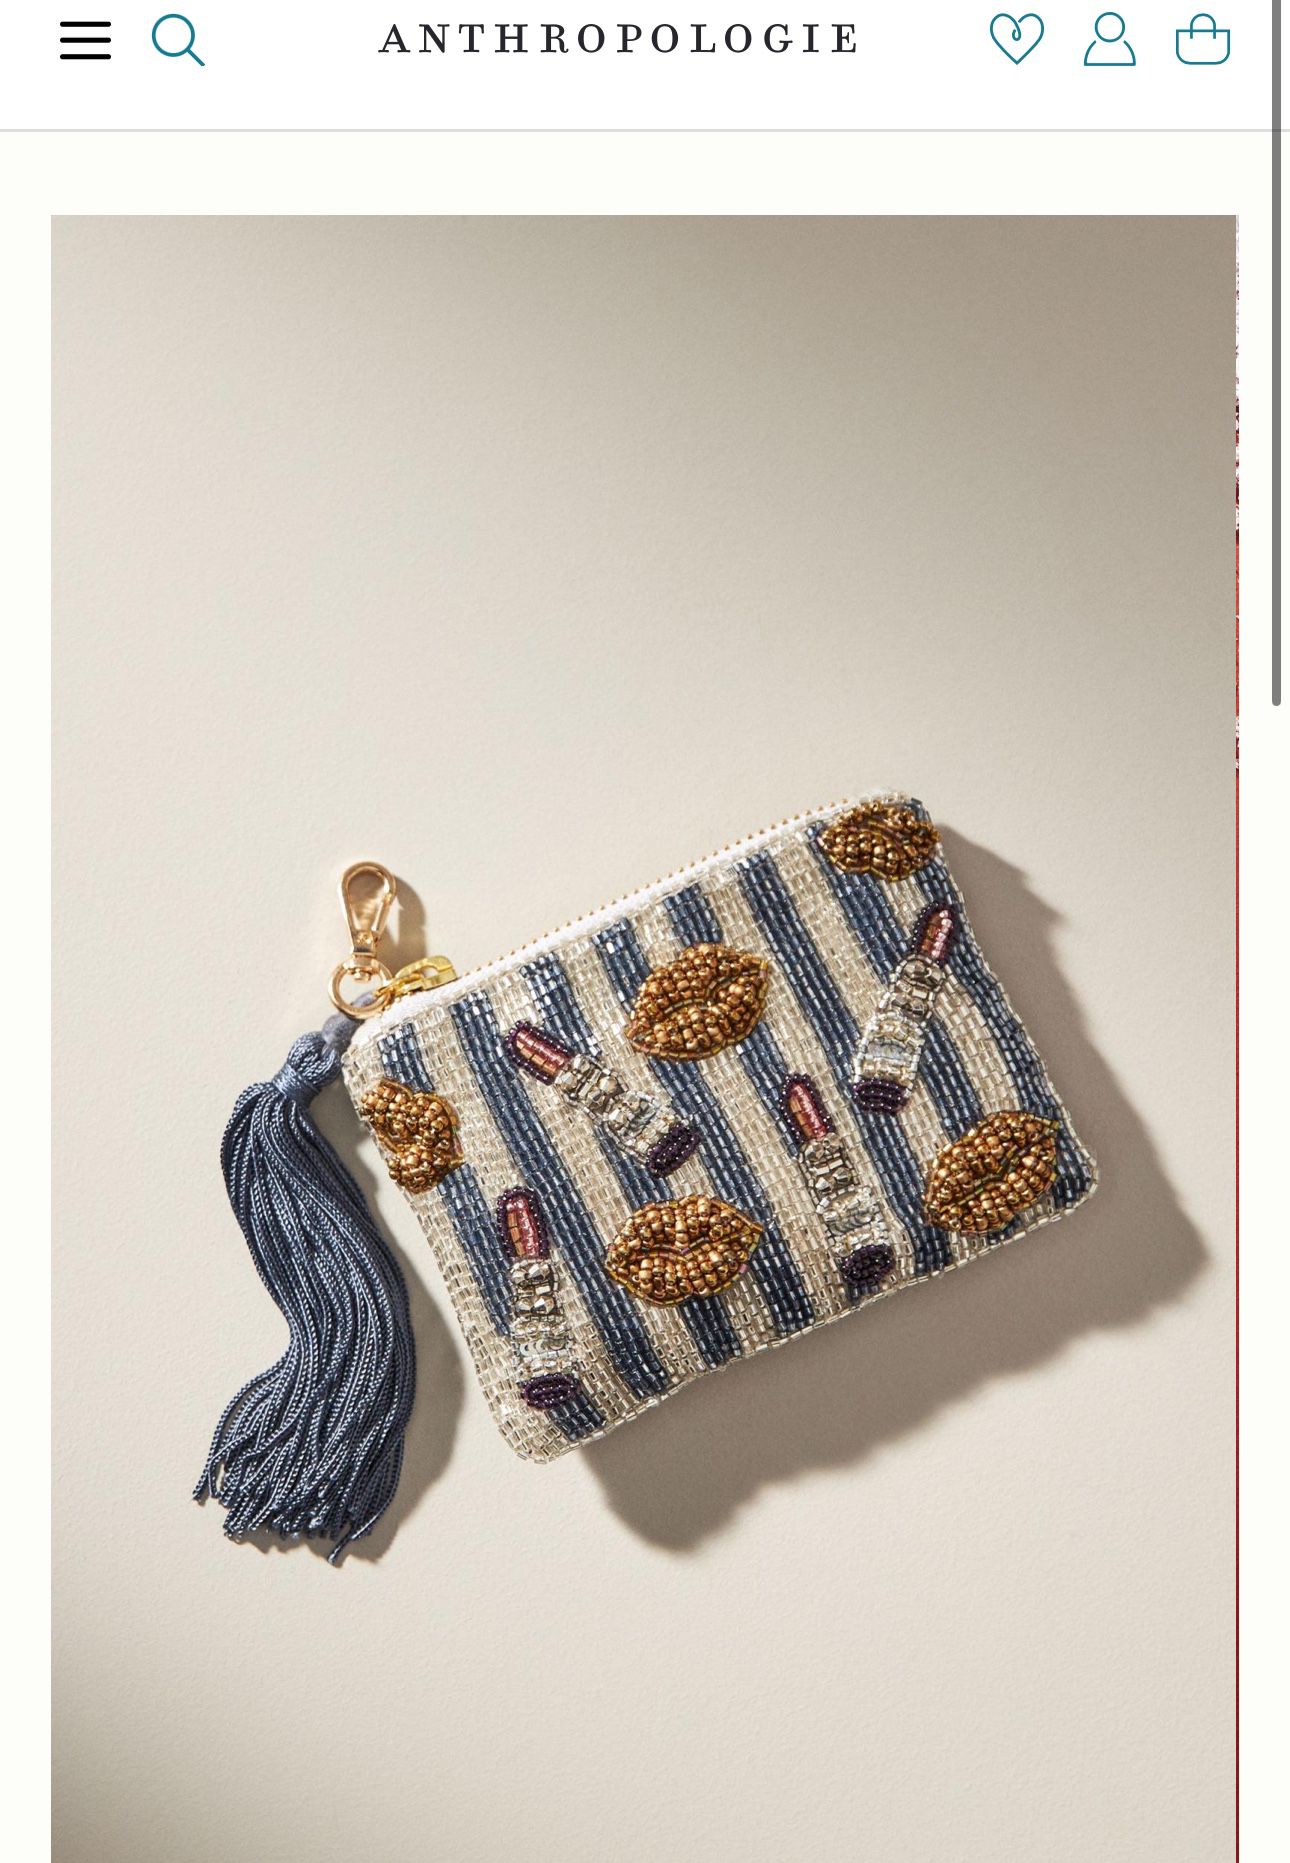 Anthropologie Beaded Coin Purse Cosmetics